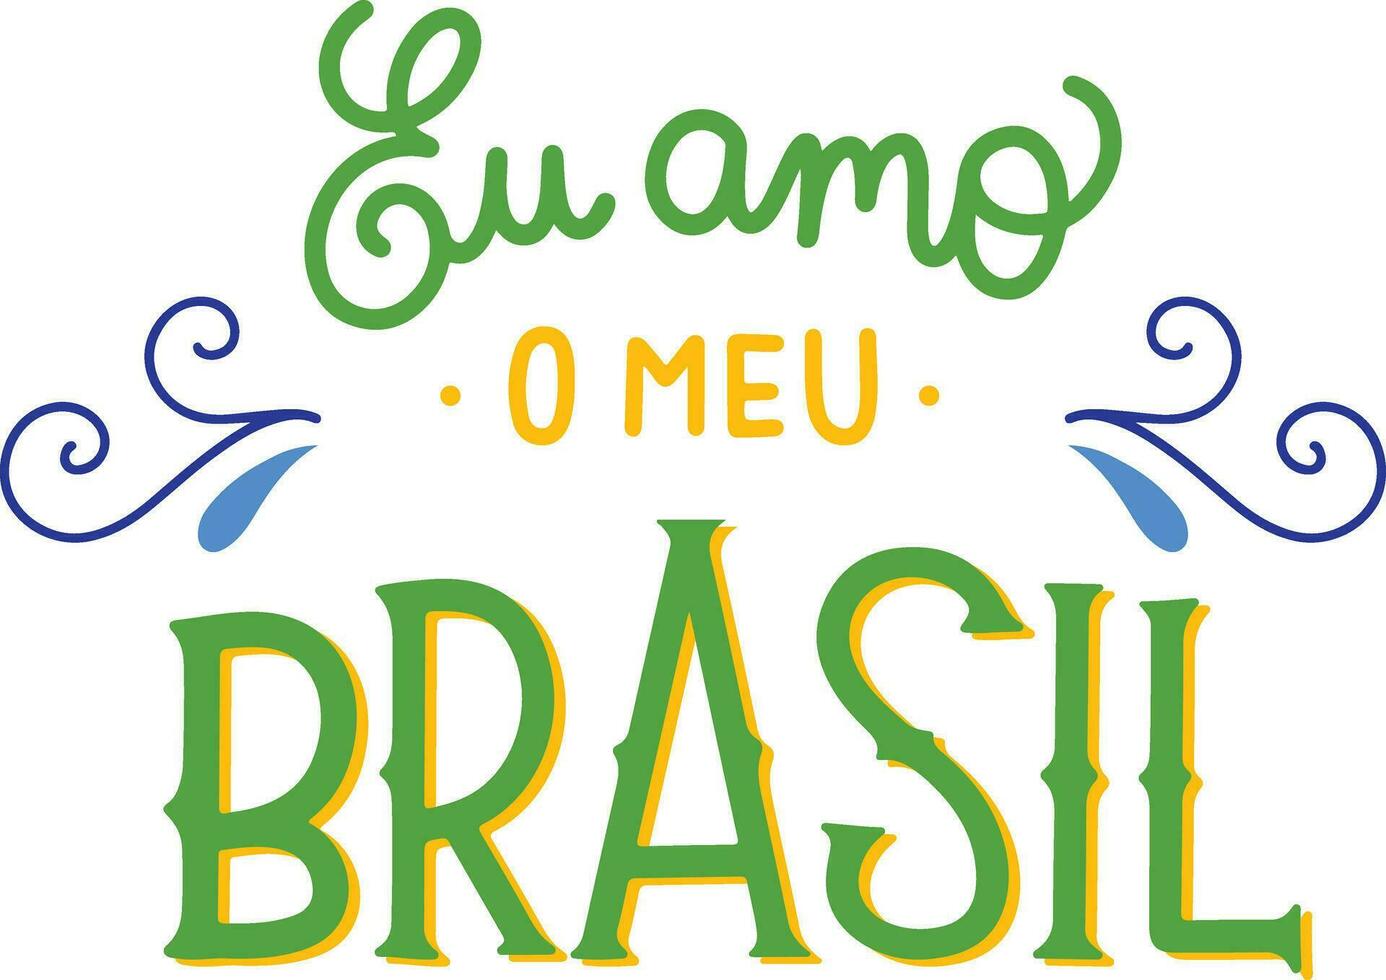 Welcome to Brazil. Hand drawn lettering isolated on white background. vector